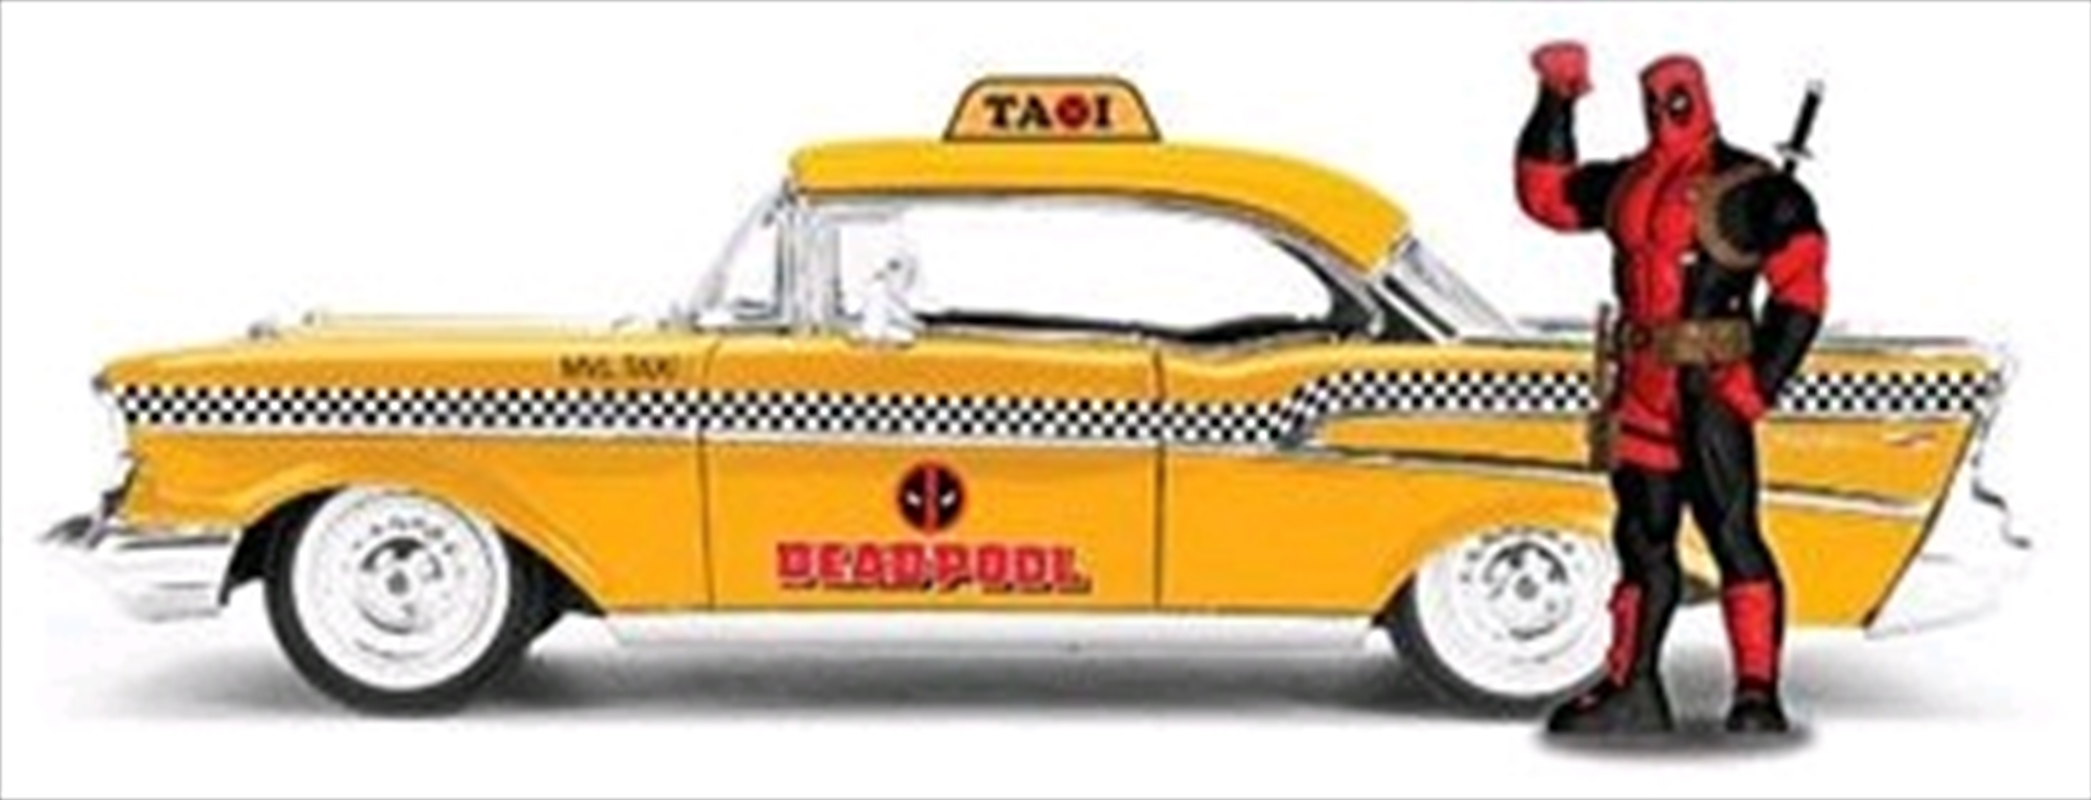 Deadpool - Chevy Yellow Taxi 1:24 Scale Hollywood Rides Diecast Vehicle | Merchandise